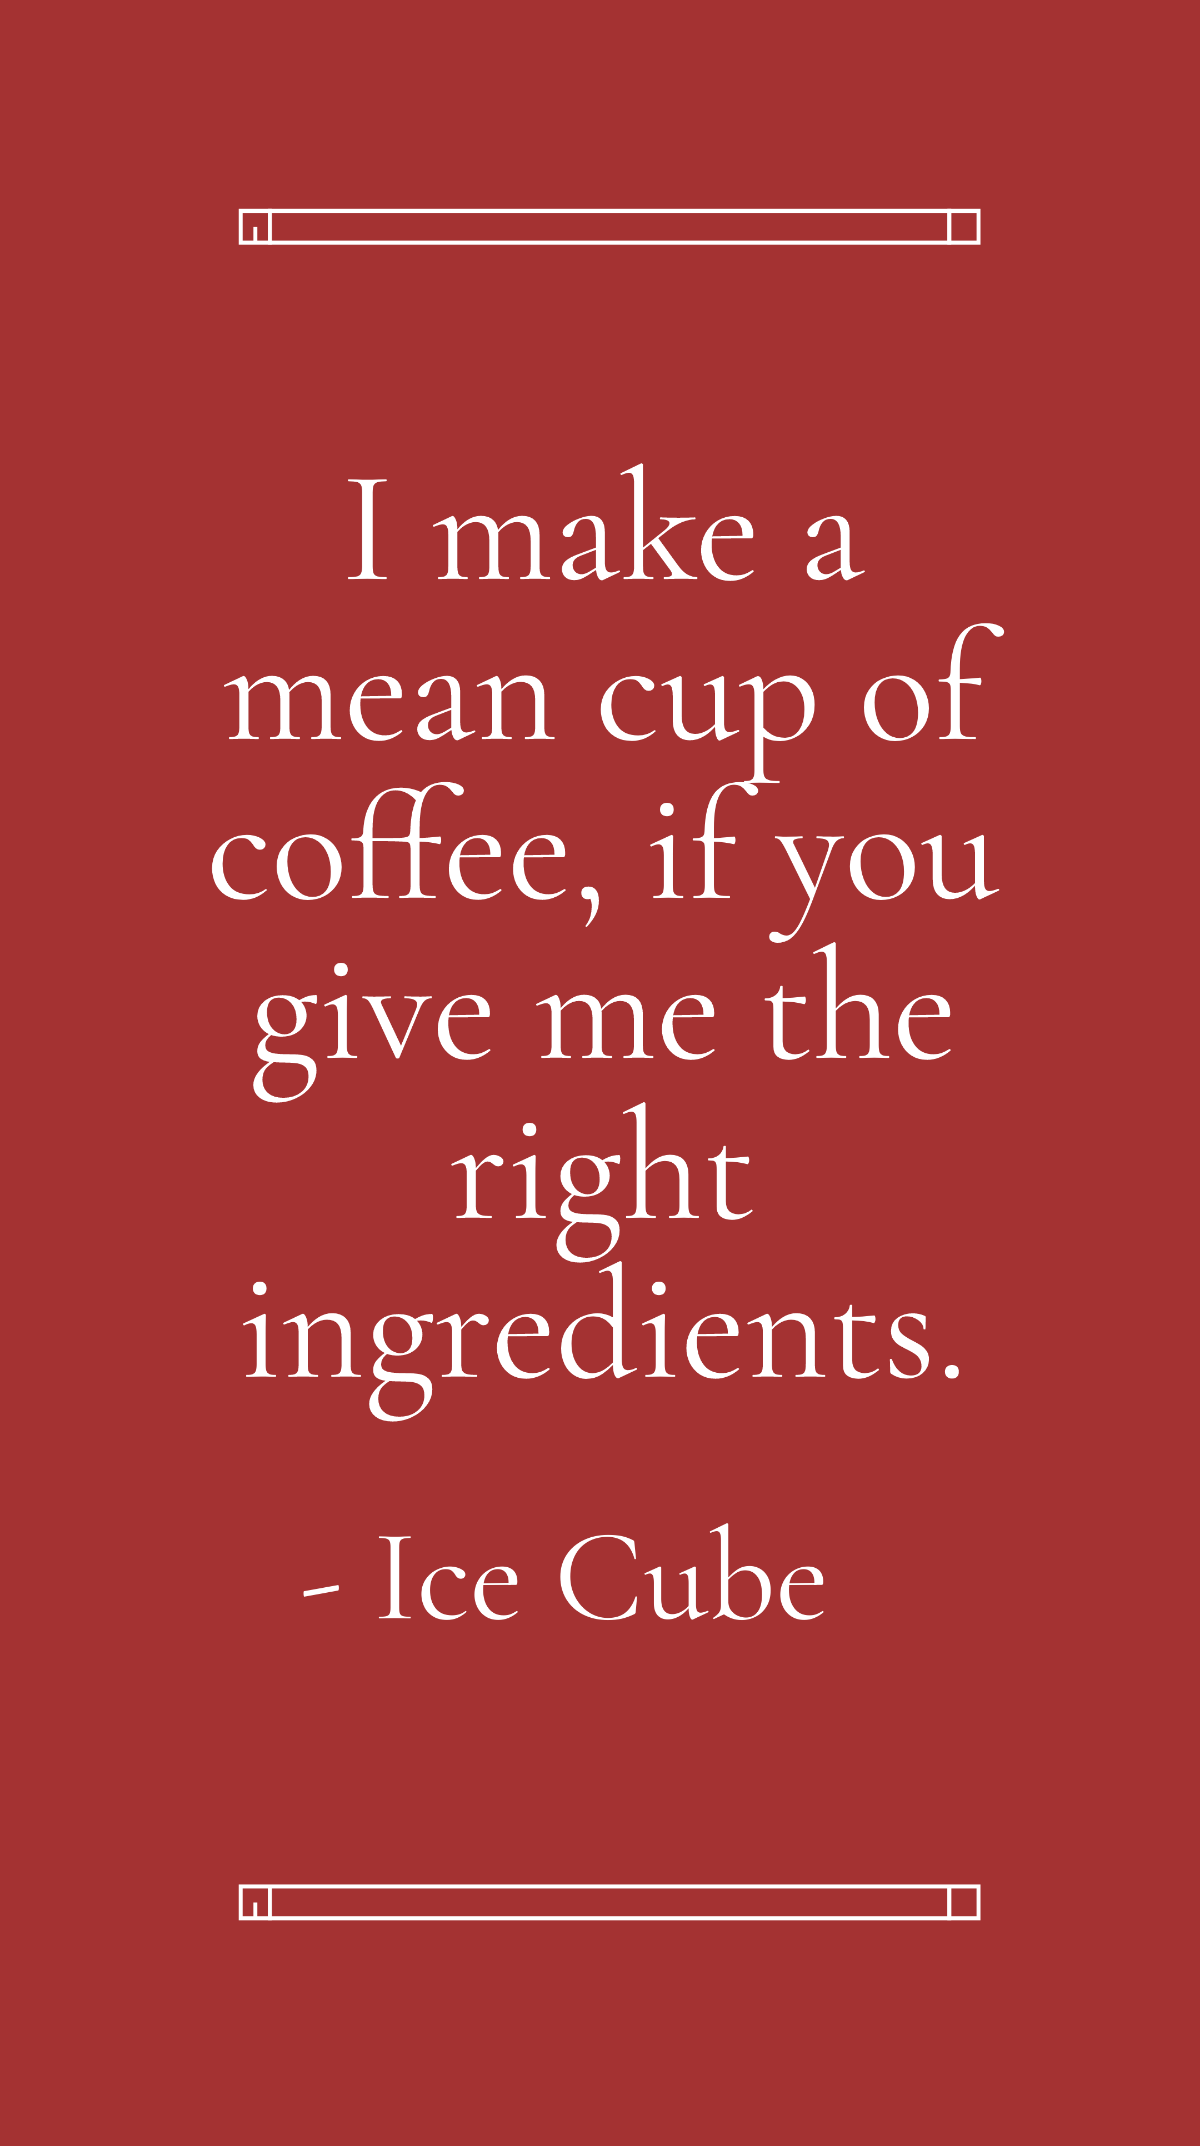 Free Ice Cube - I make a mean cup of coffee, if you give me the right ingredients. Template